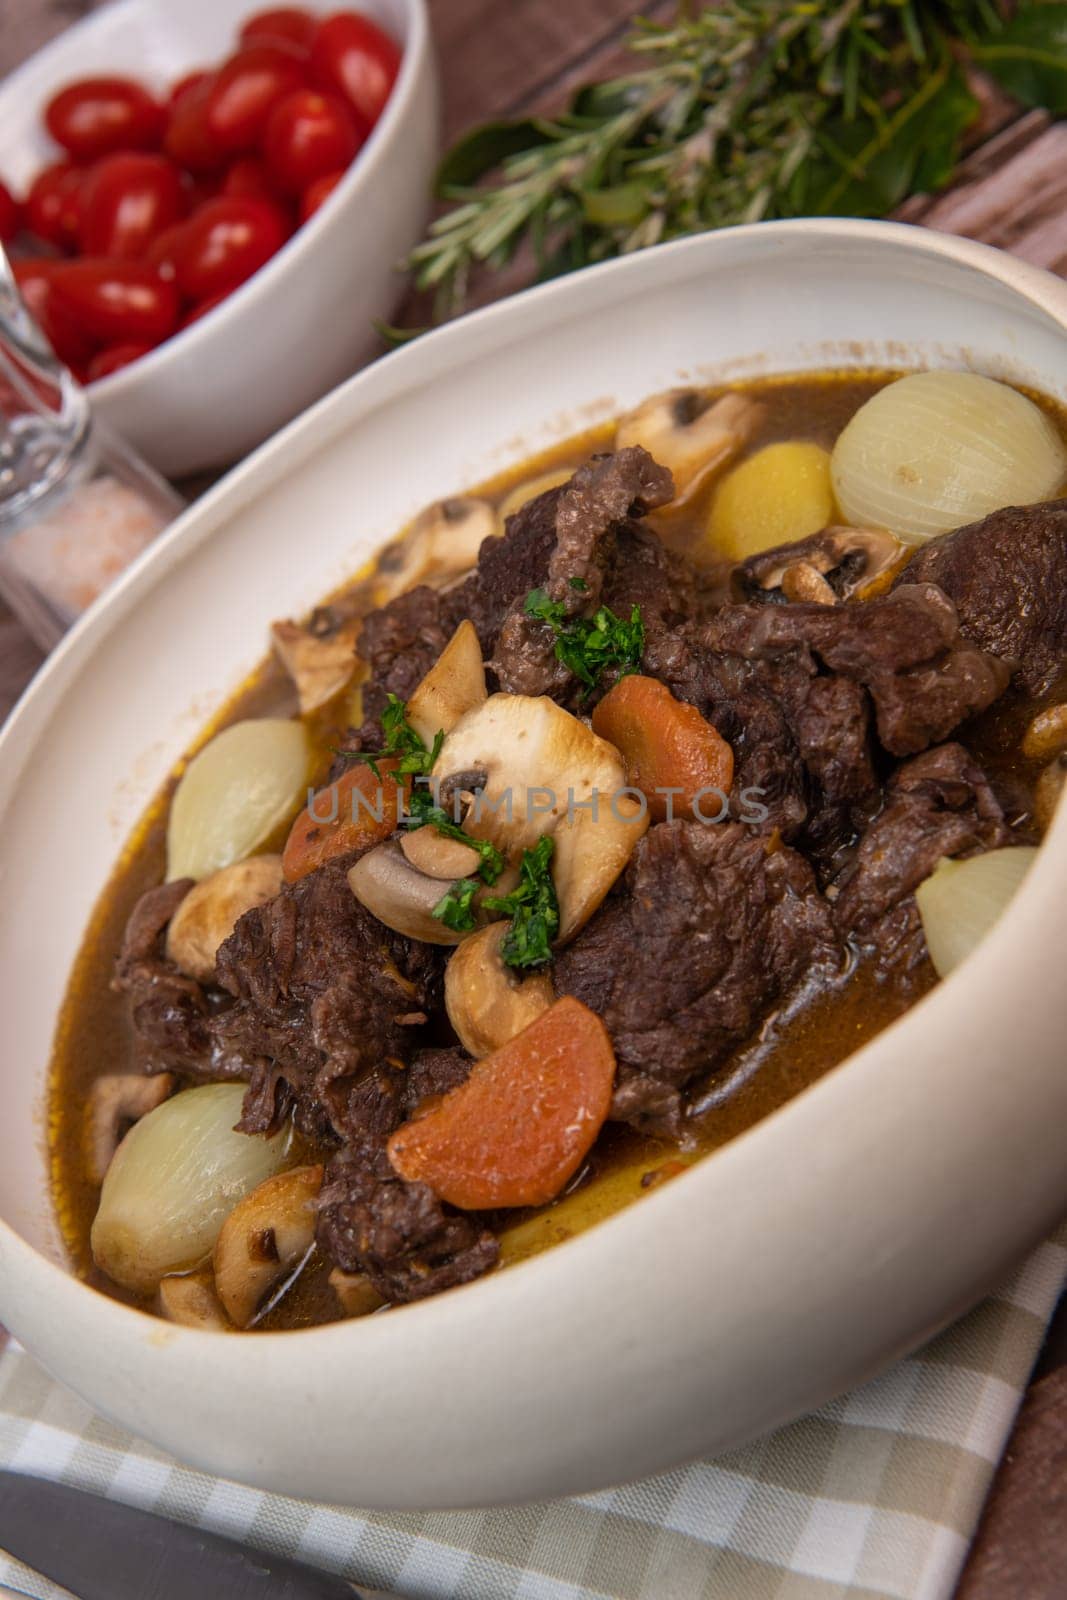 Beef bourguignon recipe, beef stew with wine sauce and vegetables. High quality photo